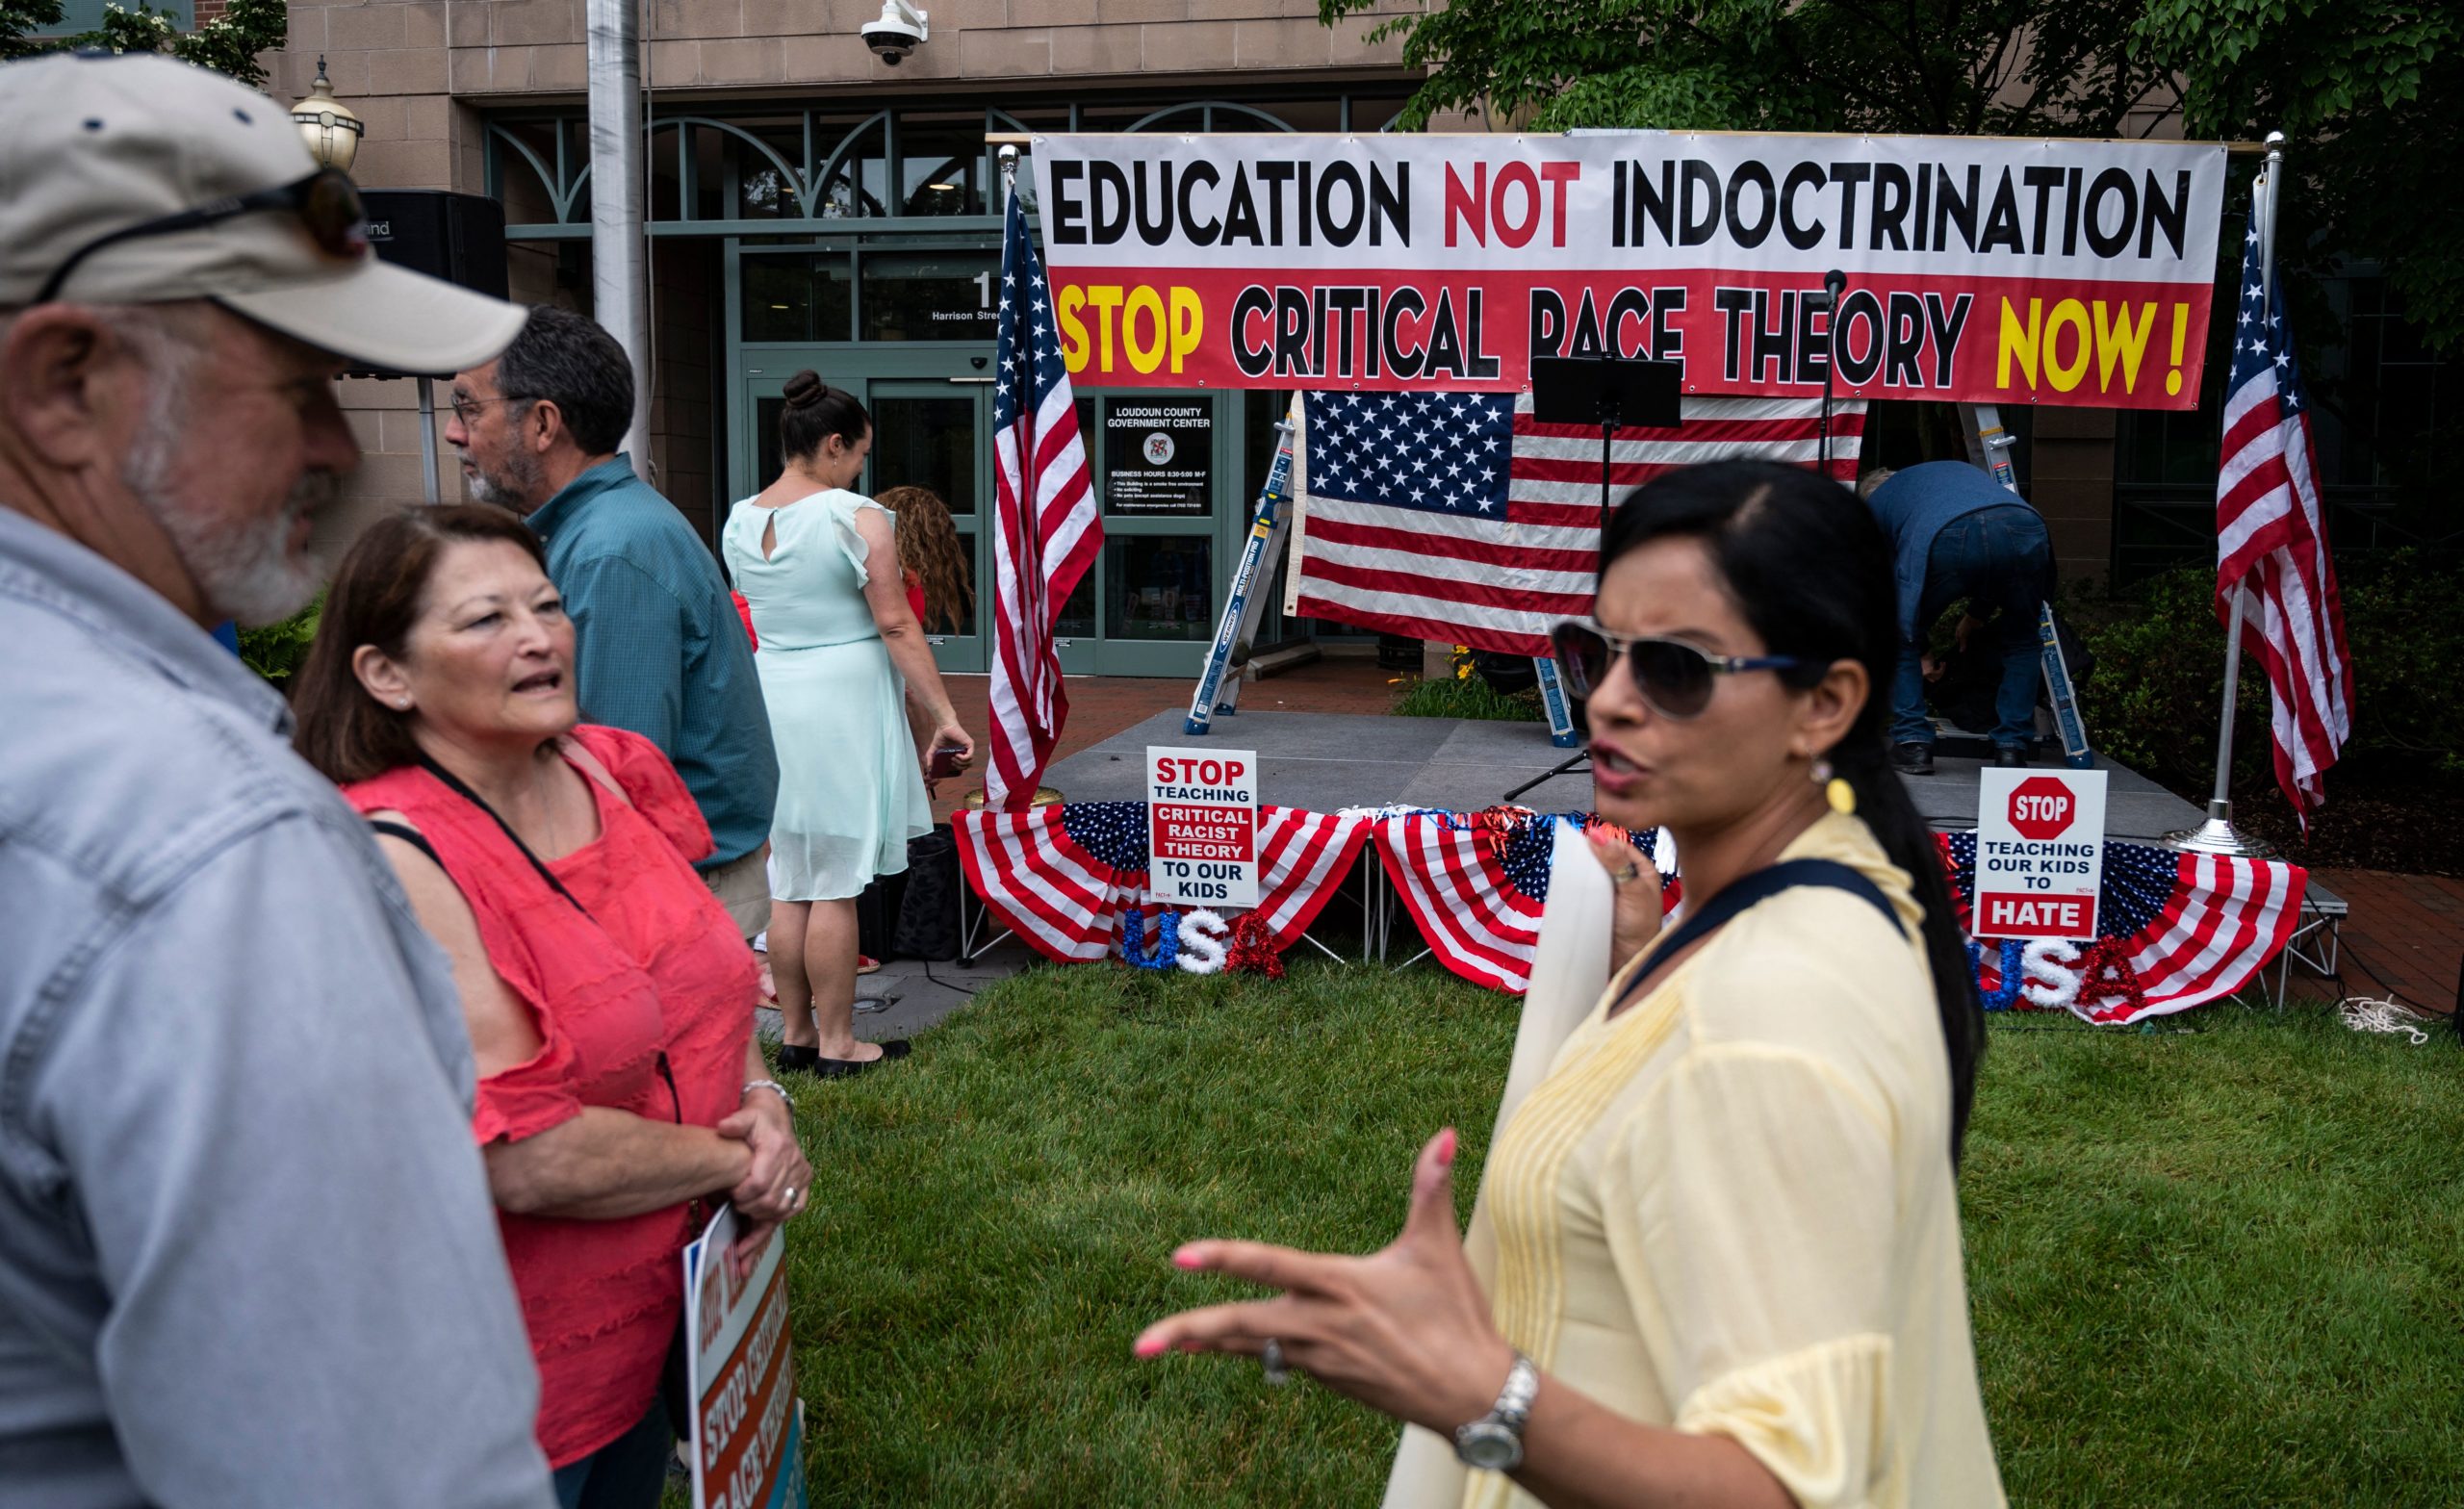 People talk before the start of a rally against "critical race theory" (CRT) being taught in schools at the Loudoun County Government center in Leesburg, Virginia on June 12, 2021.(Photo by ANDREW CABALLERO-REYNOLDS/AFP via Getty Images)